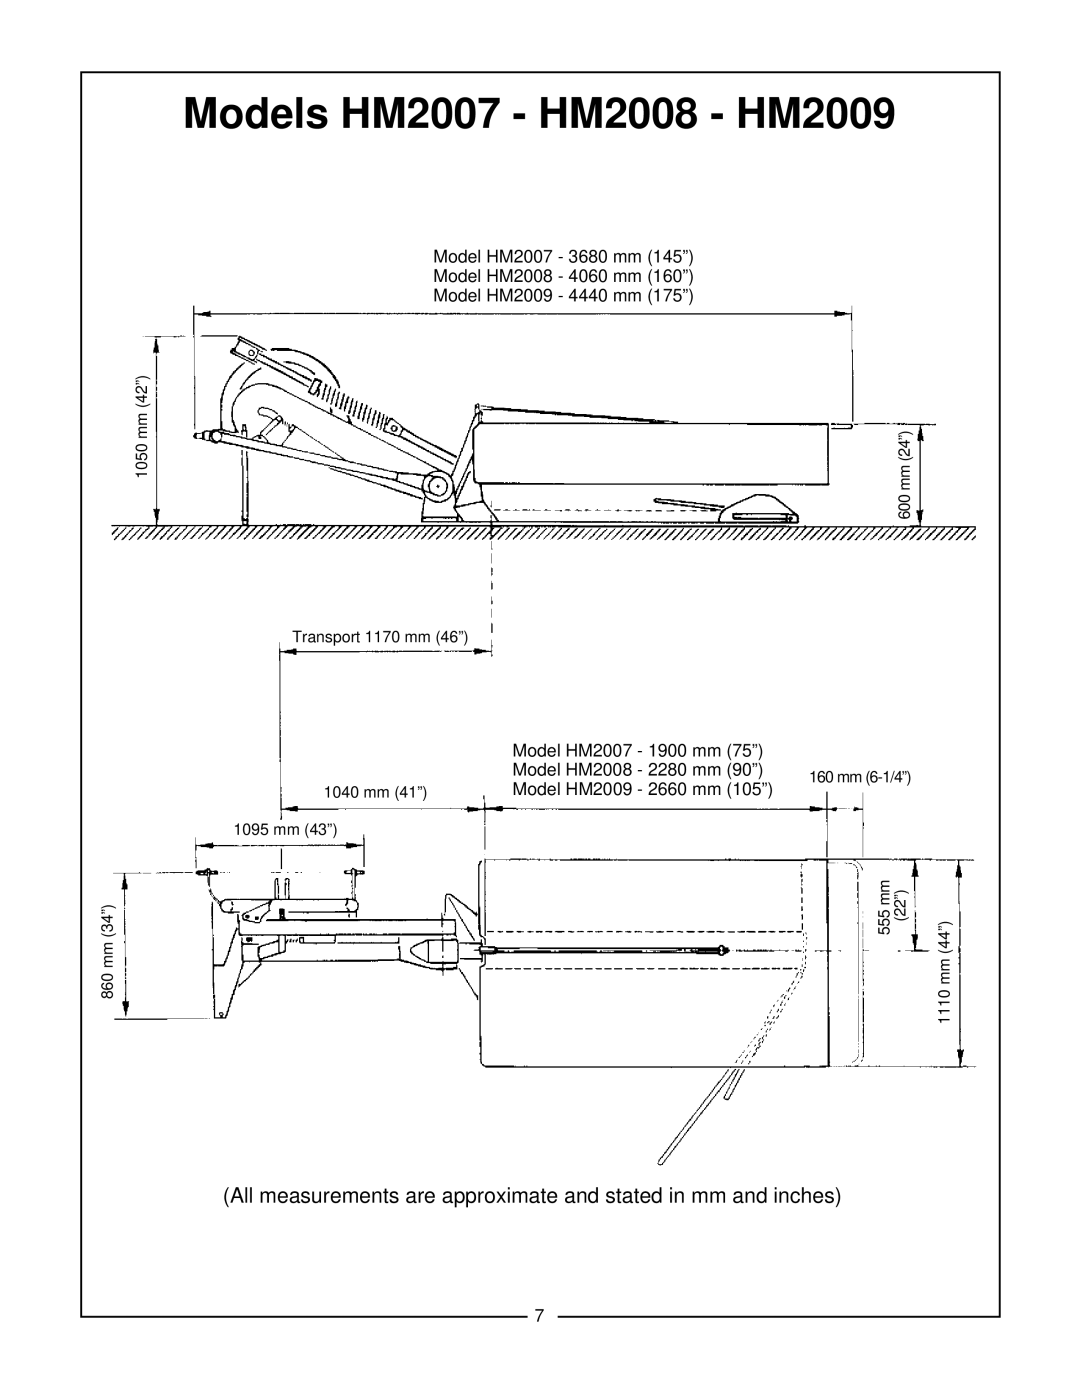 Bush Hog manual Models HM2007 - HM2008 - HM2009, All measurements are approximate and stated in mm and inches 